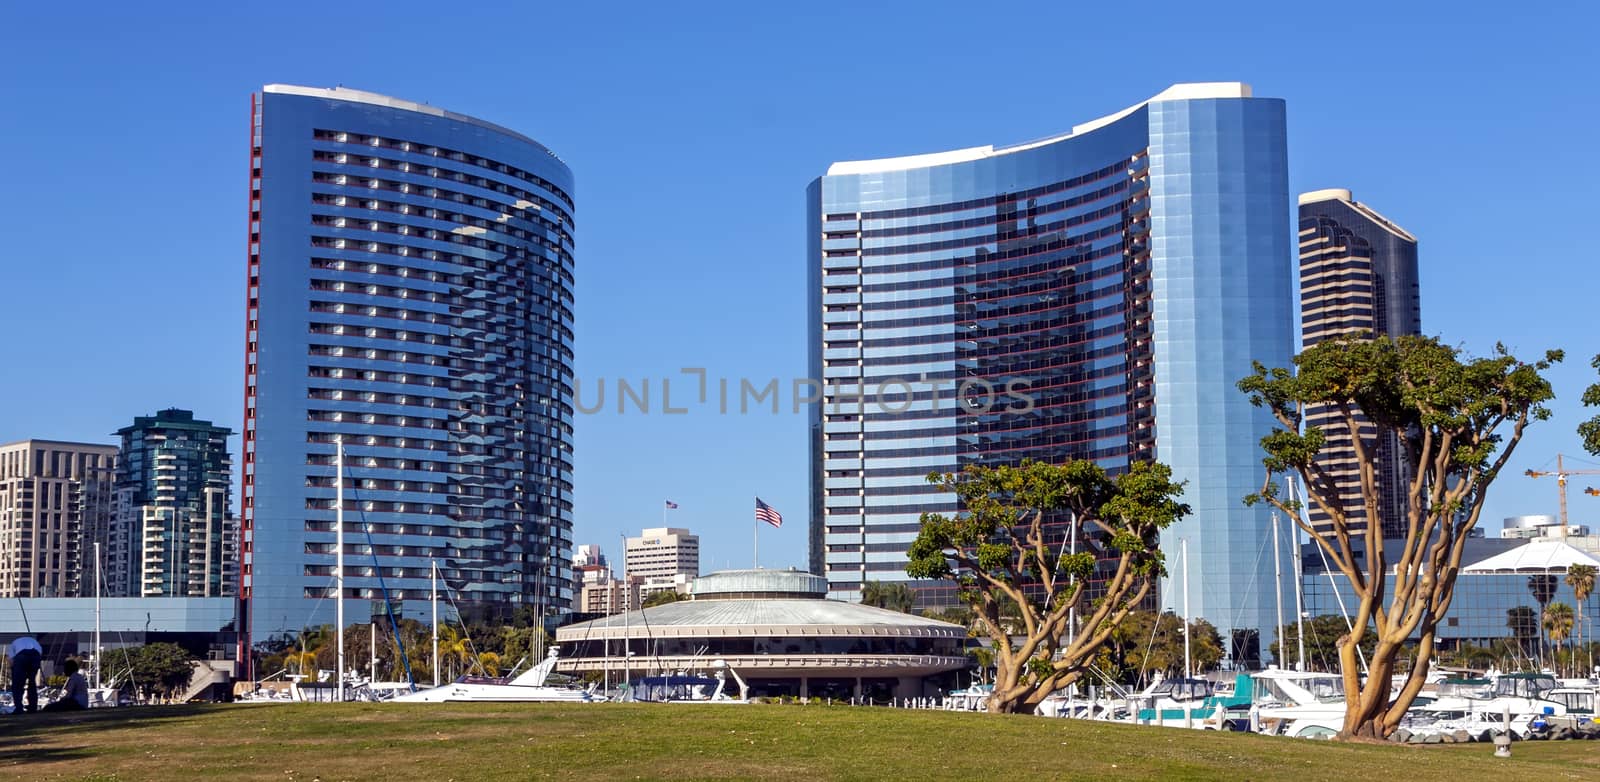 SAN DIEGO,CA - APRIL 07,2014 :A View on hotel Marriott in San Diego,California,United States of America.